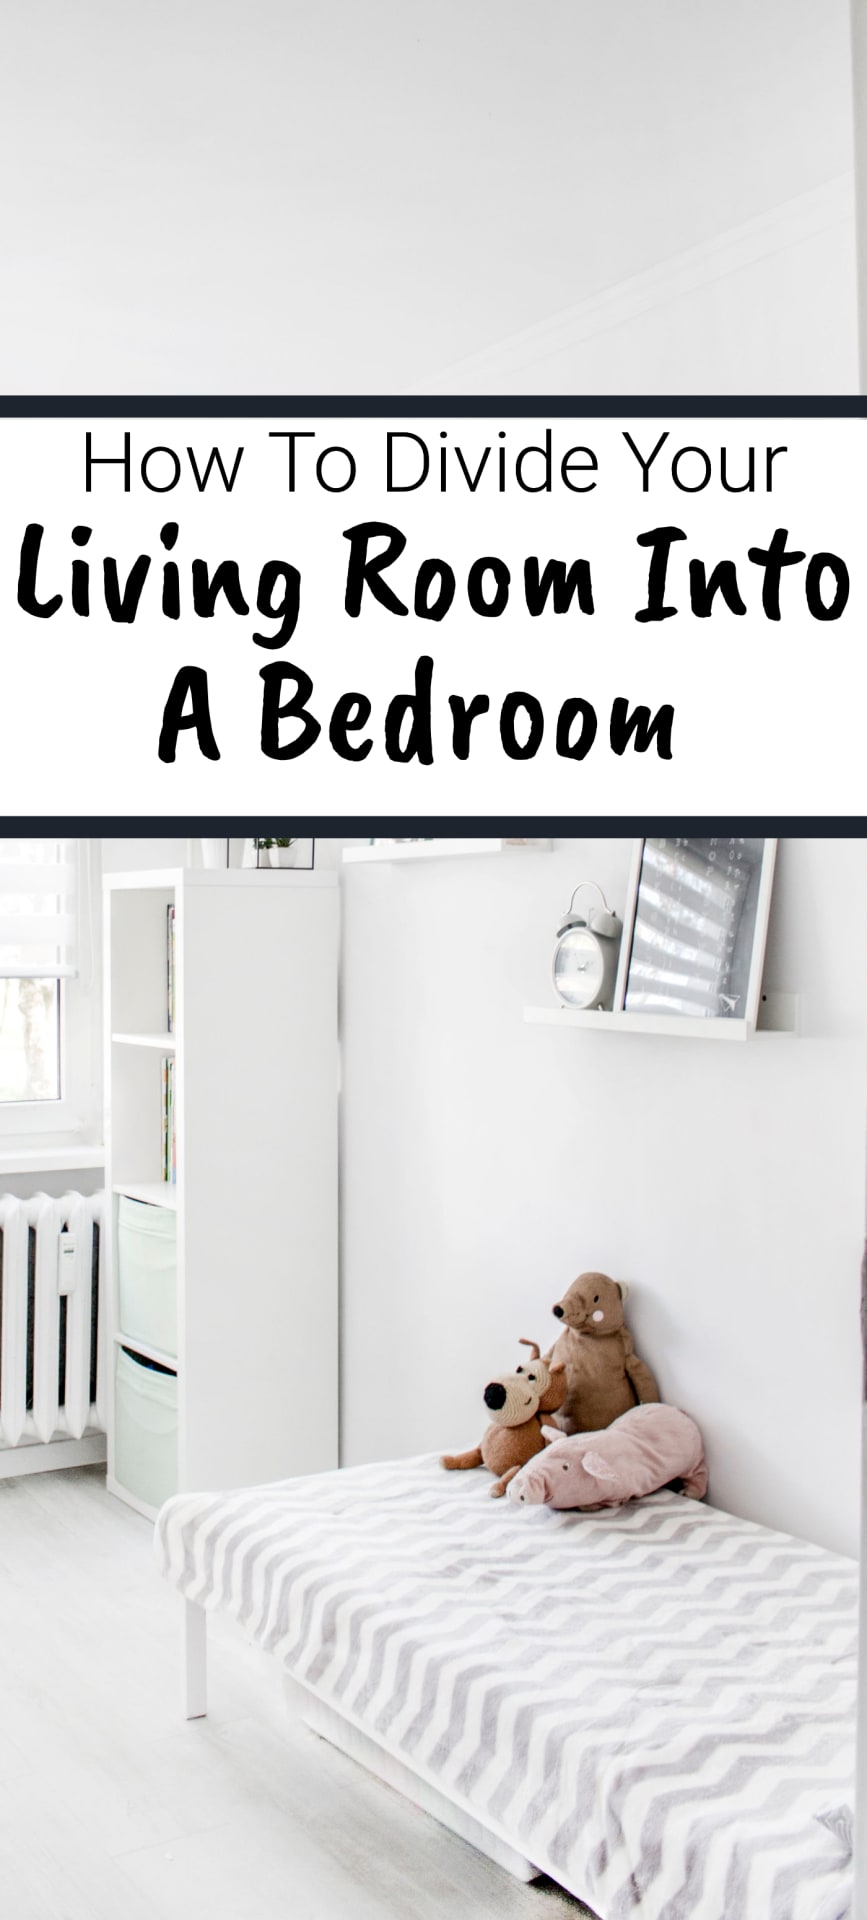 How to divide your living room into a bedroom 1 1